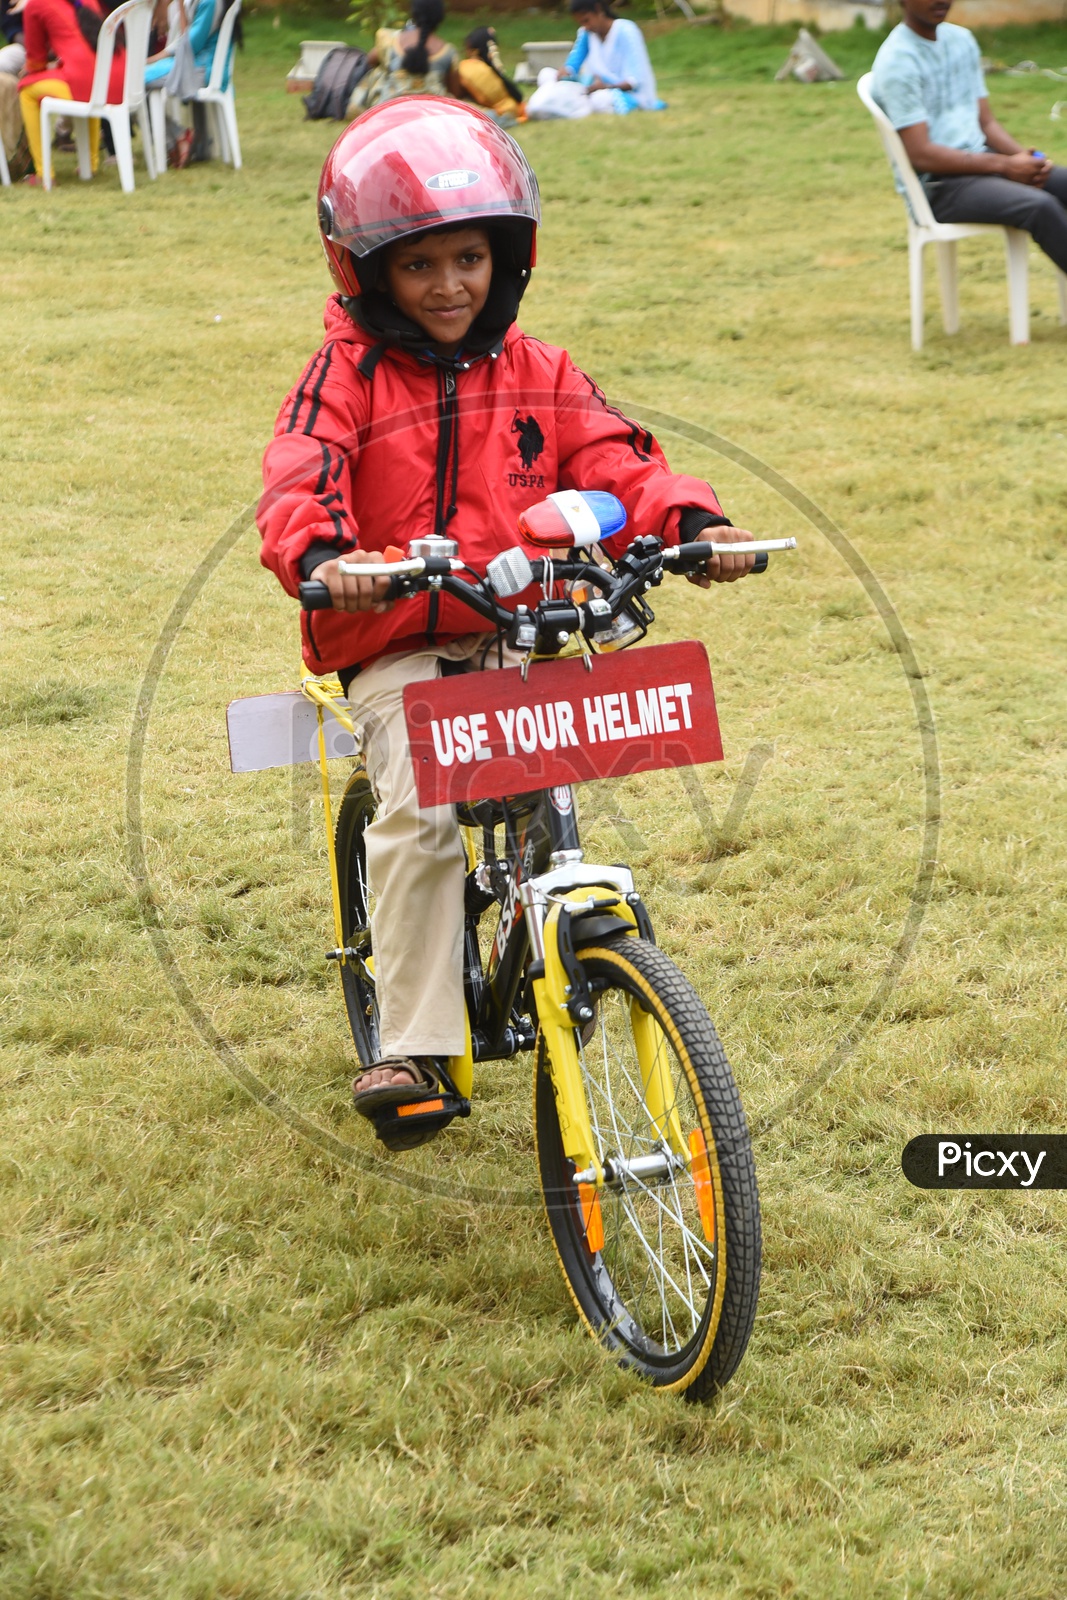 A Young Girl Promoting Use Your Helmet